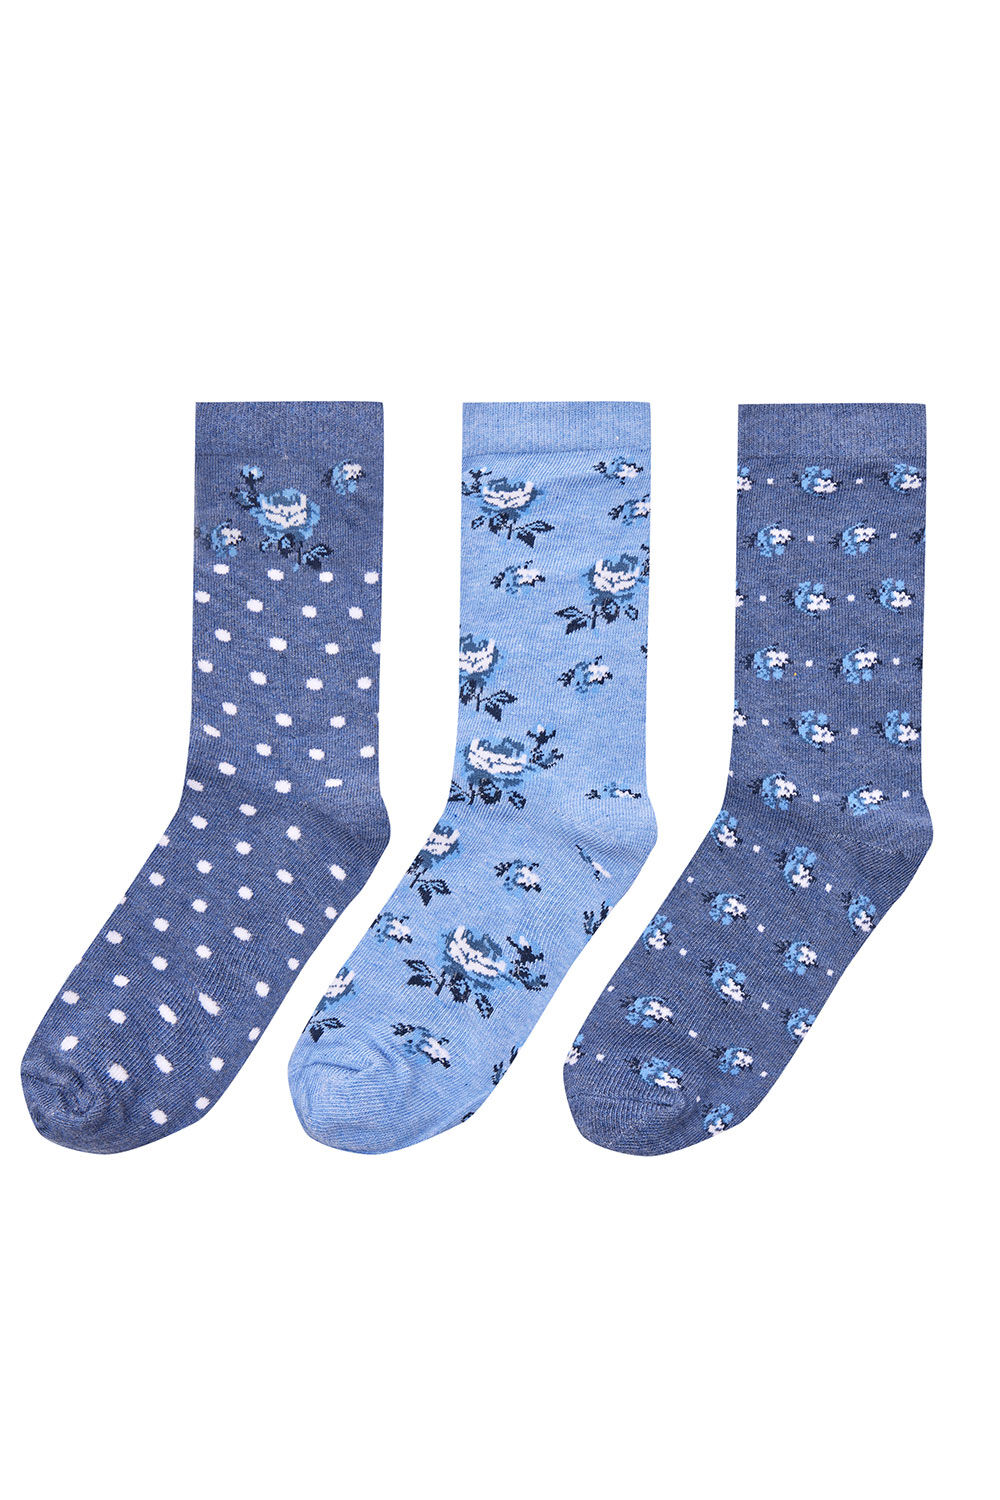 Bonmarche Navy 3 Pack Floral and Spot Blue Marl Socks, Size: One Size